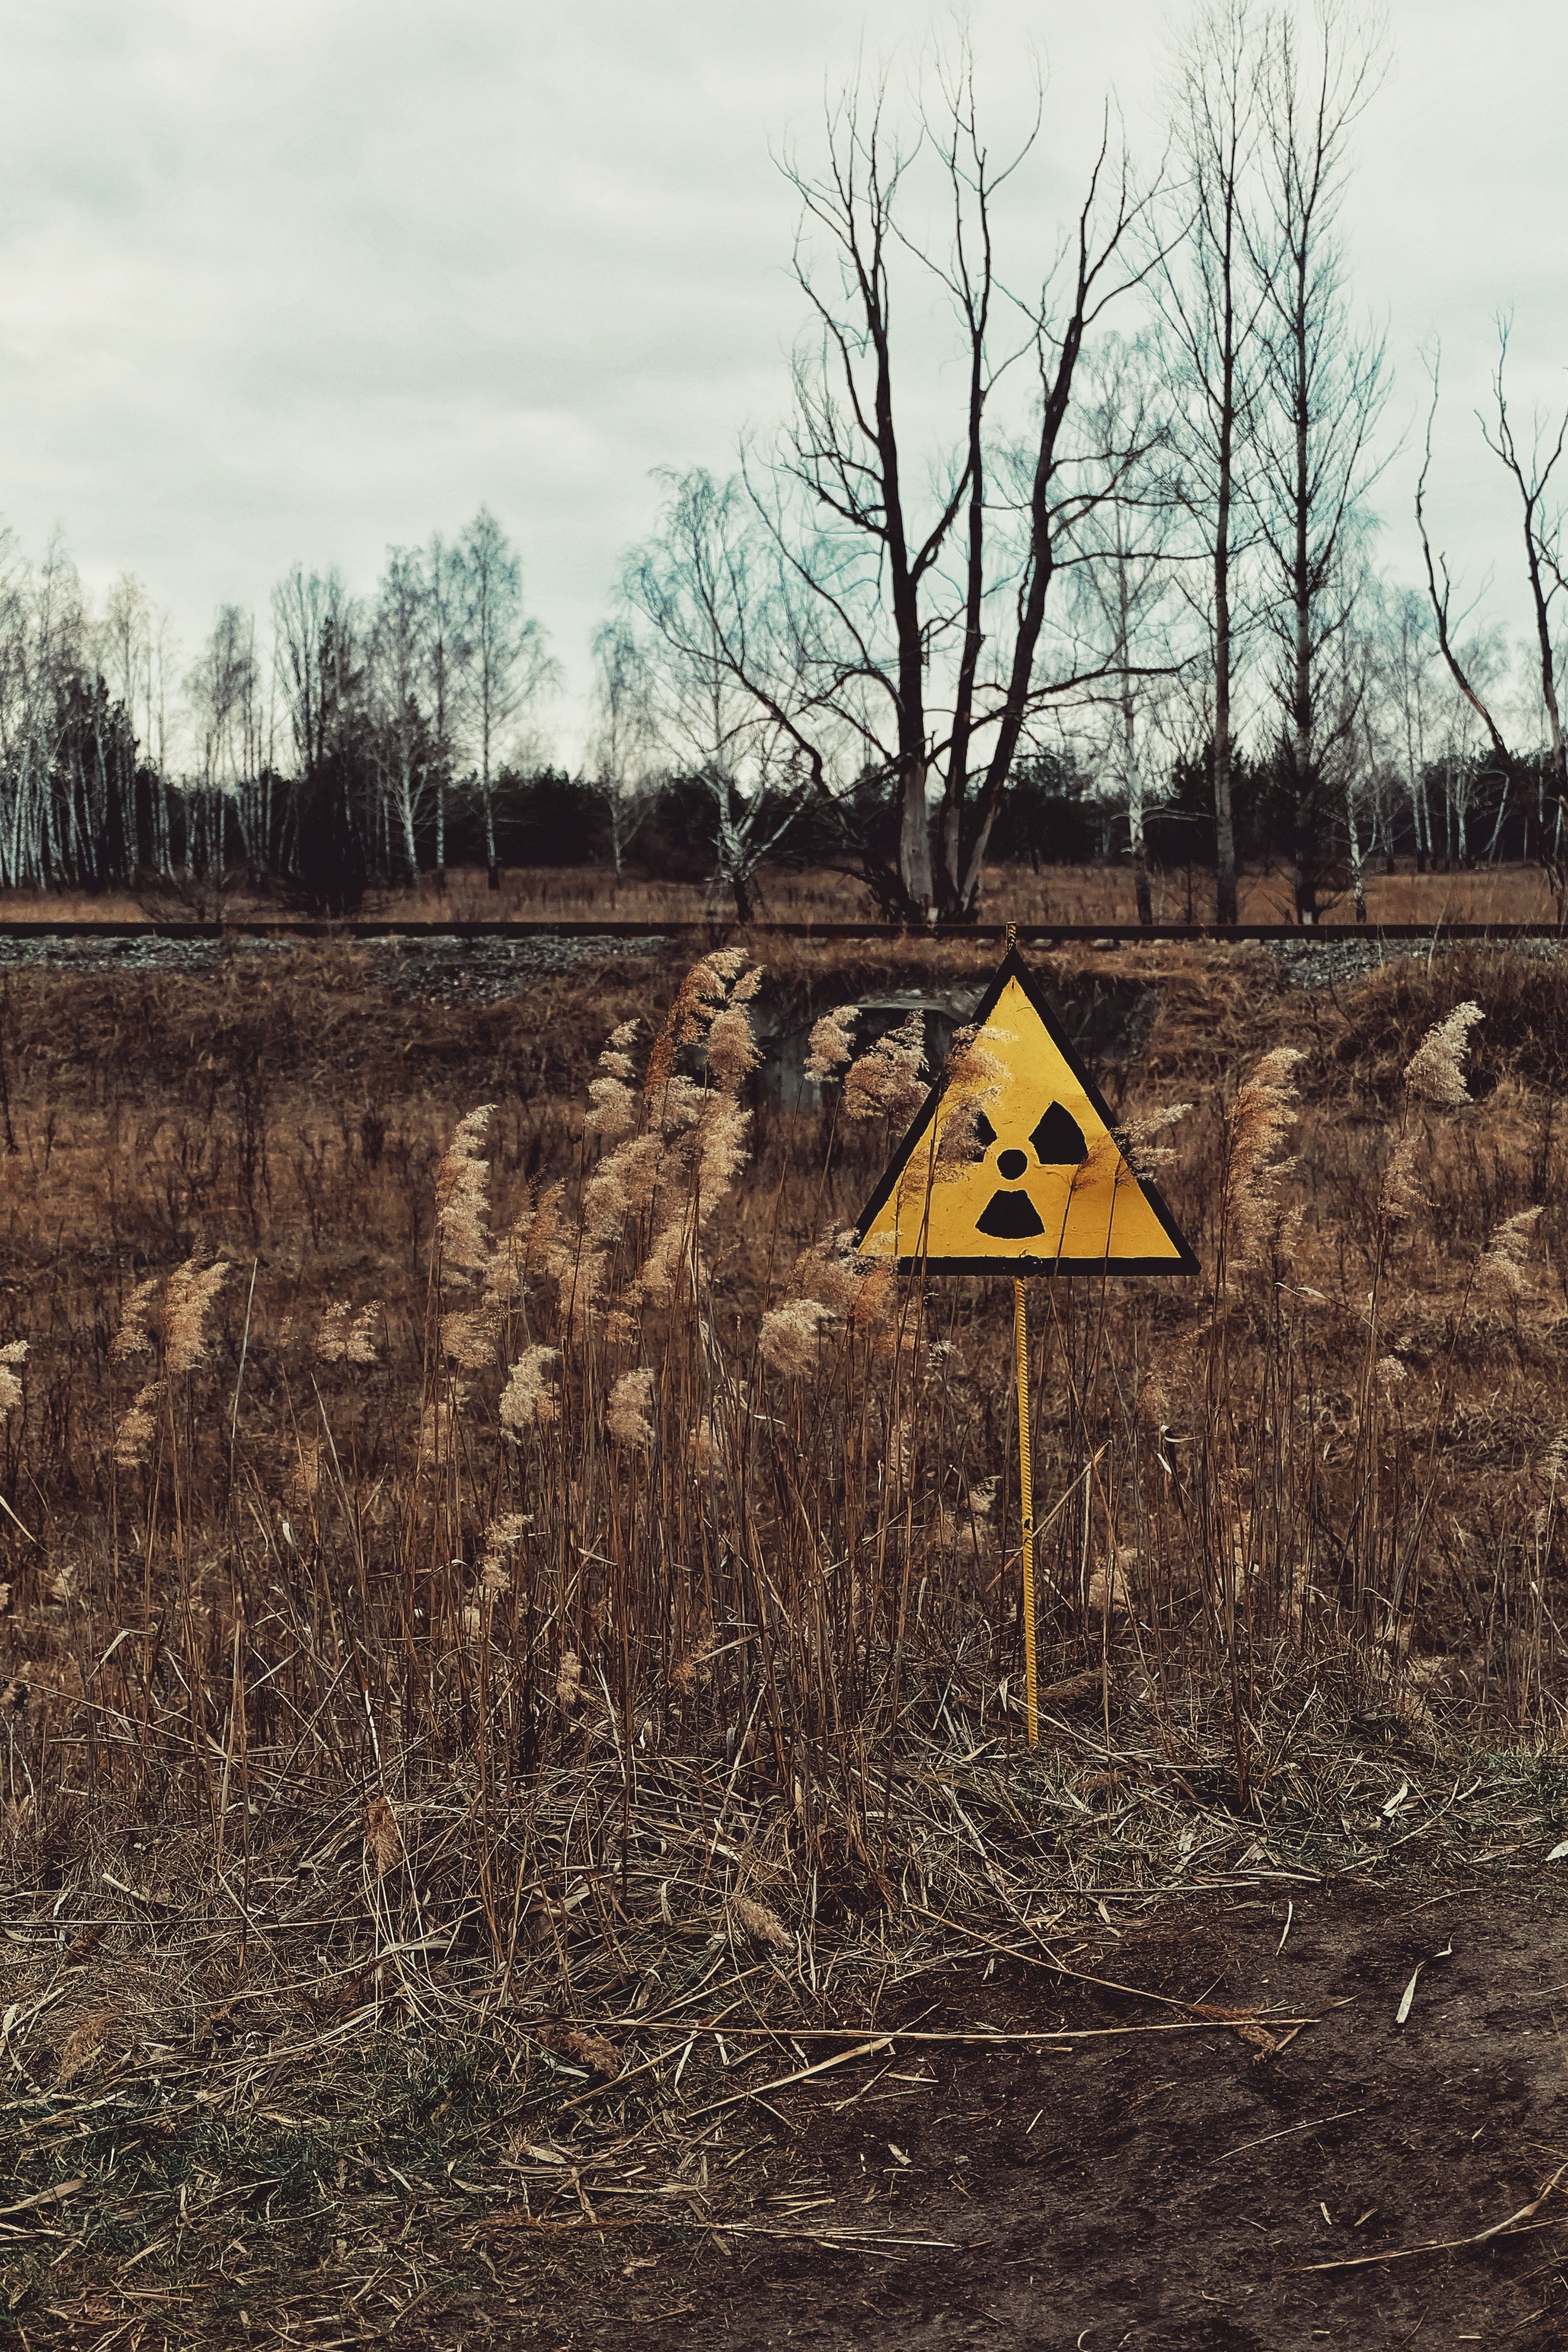 Nuclear radiation sign